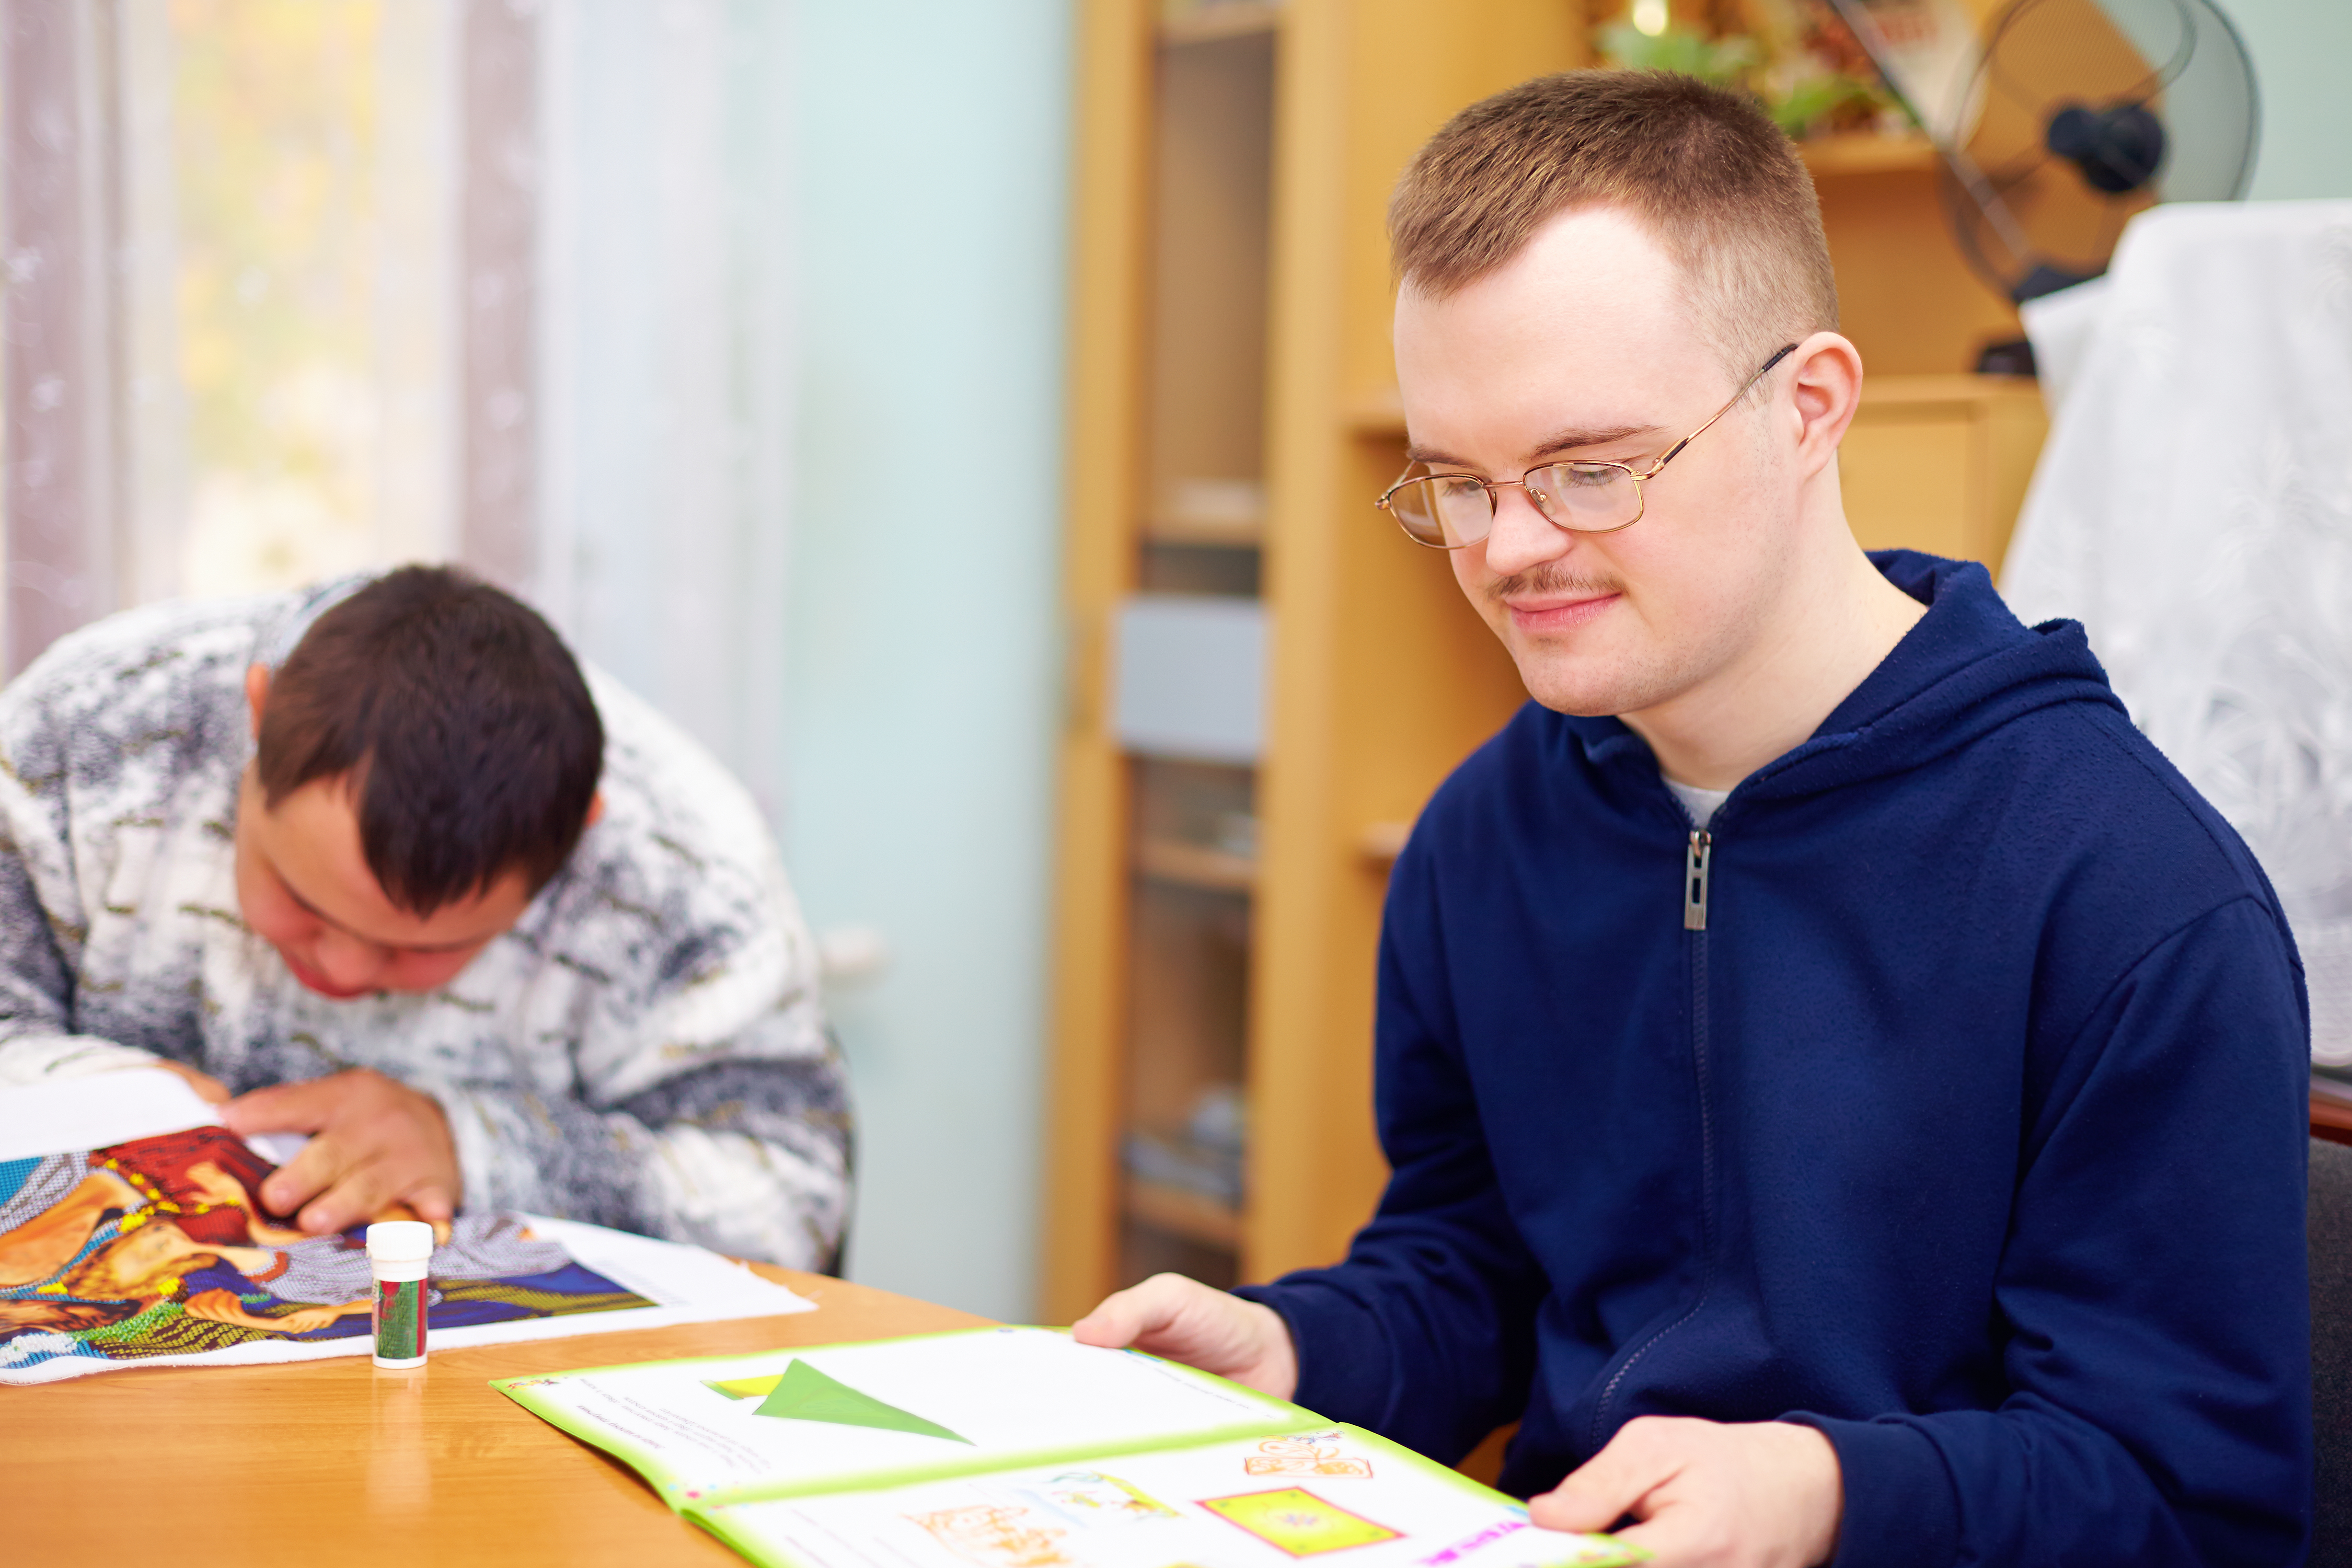 Students working in a special education needs classroom